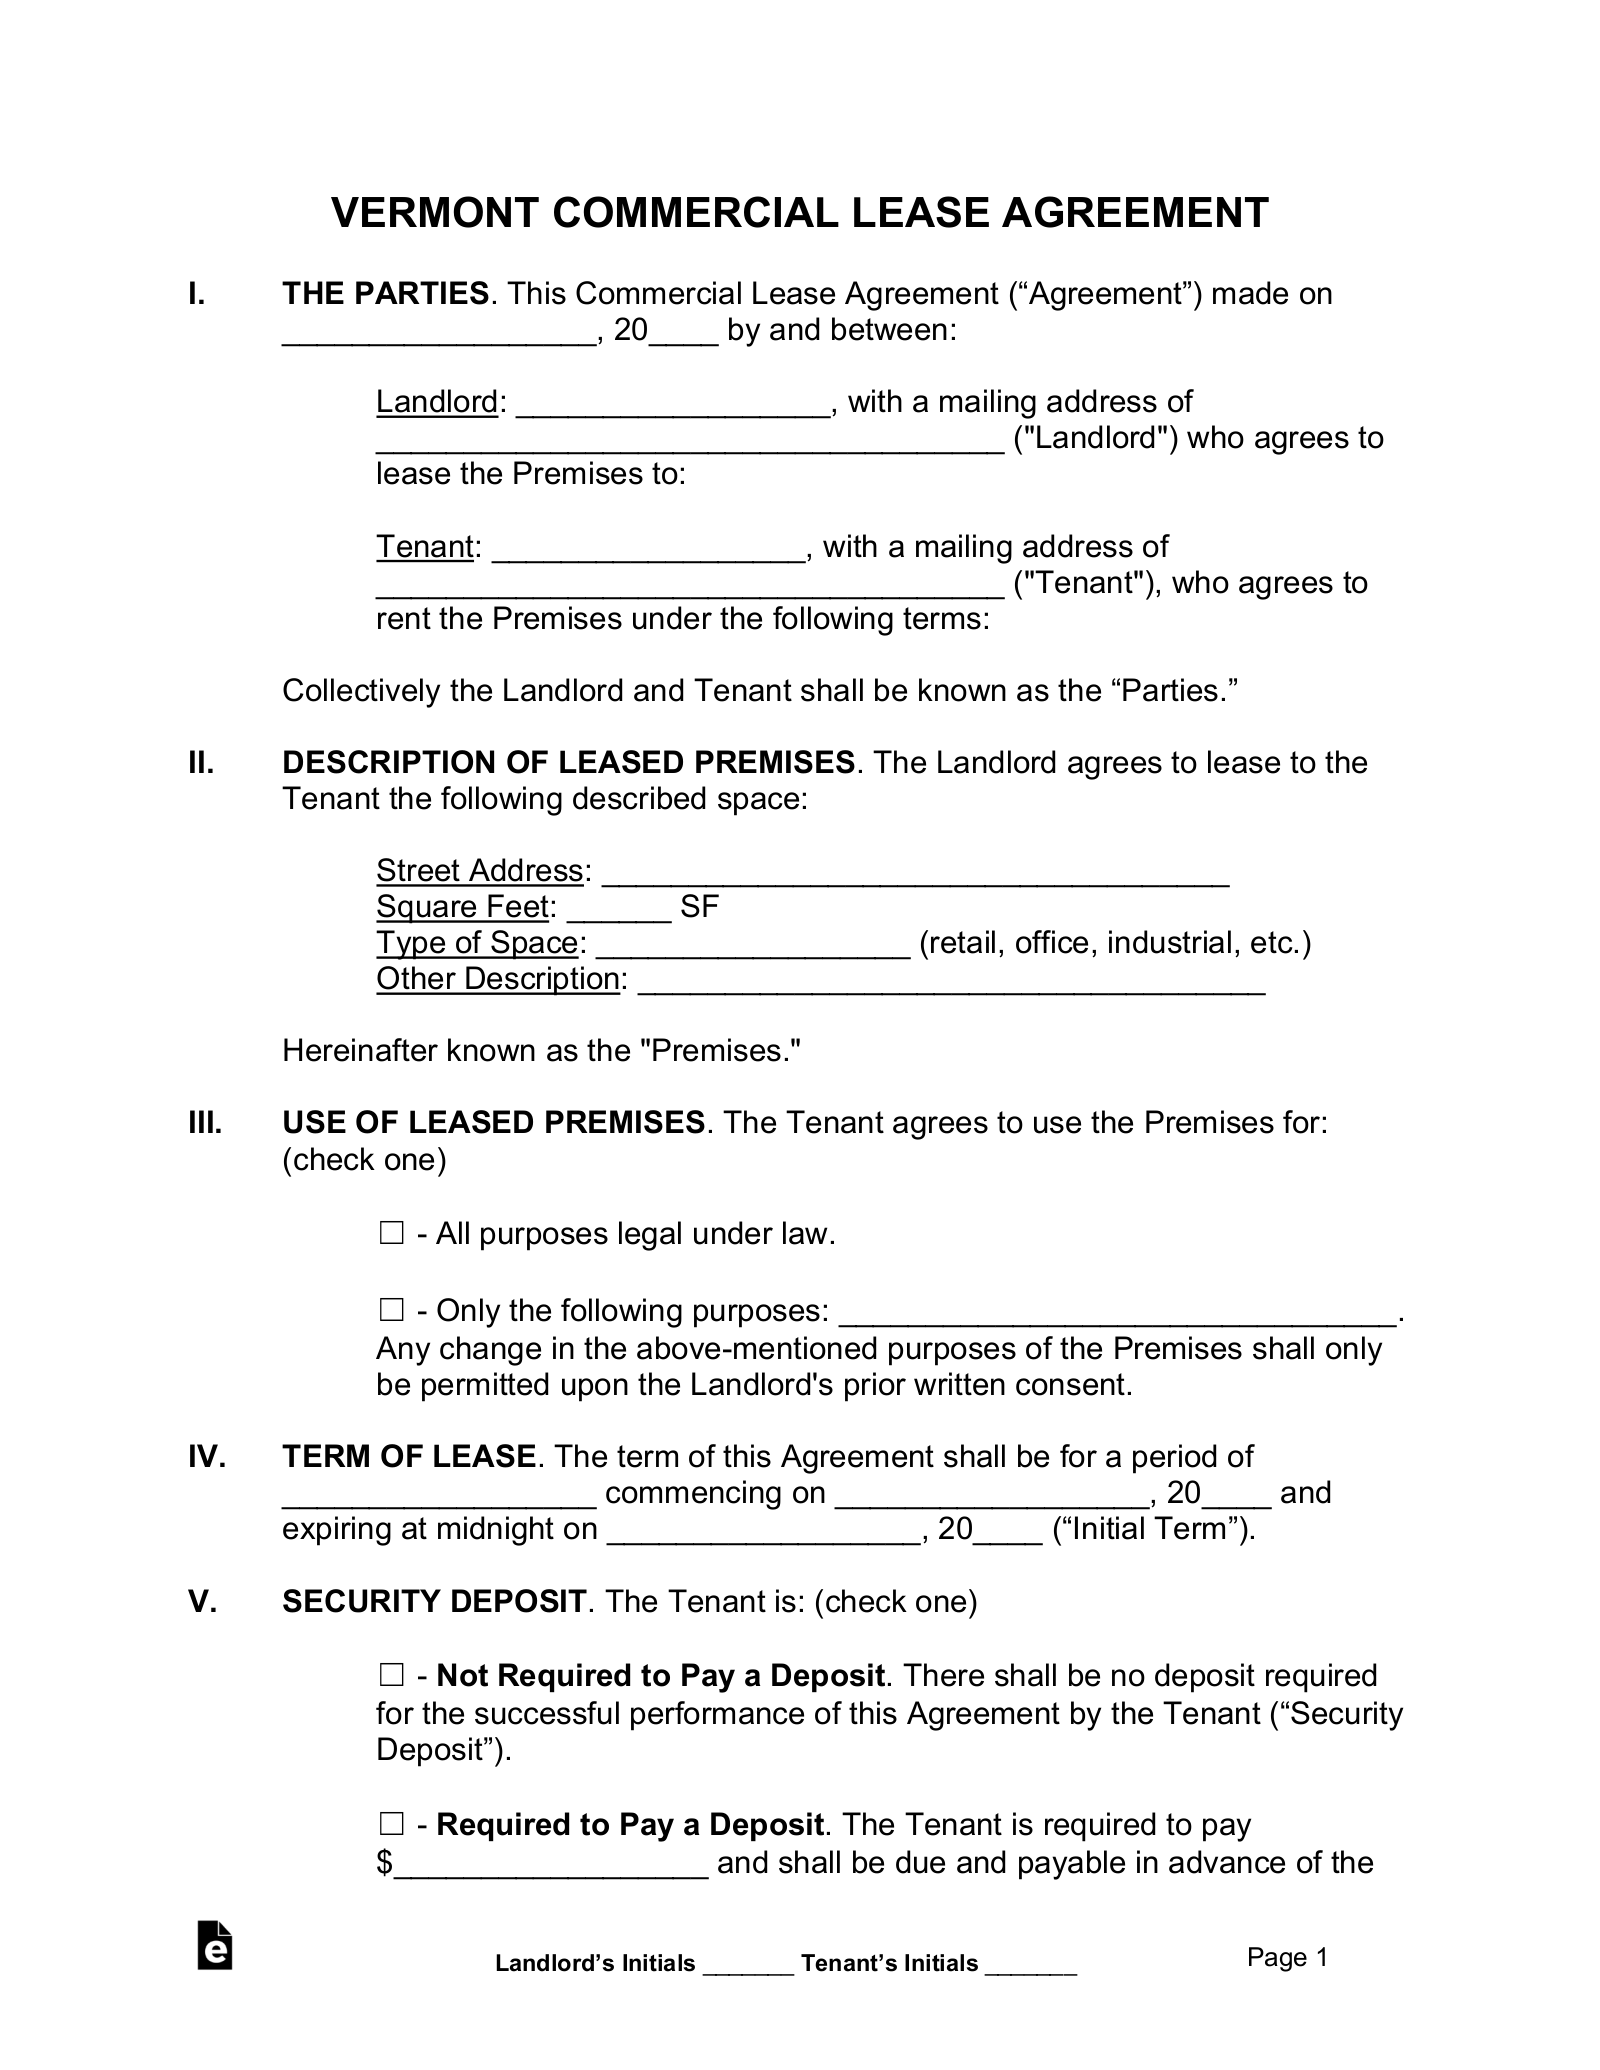 Vermont Commercial Lease Agreement Template